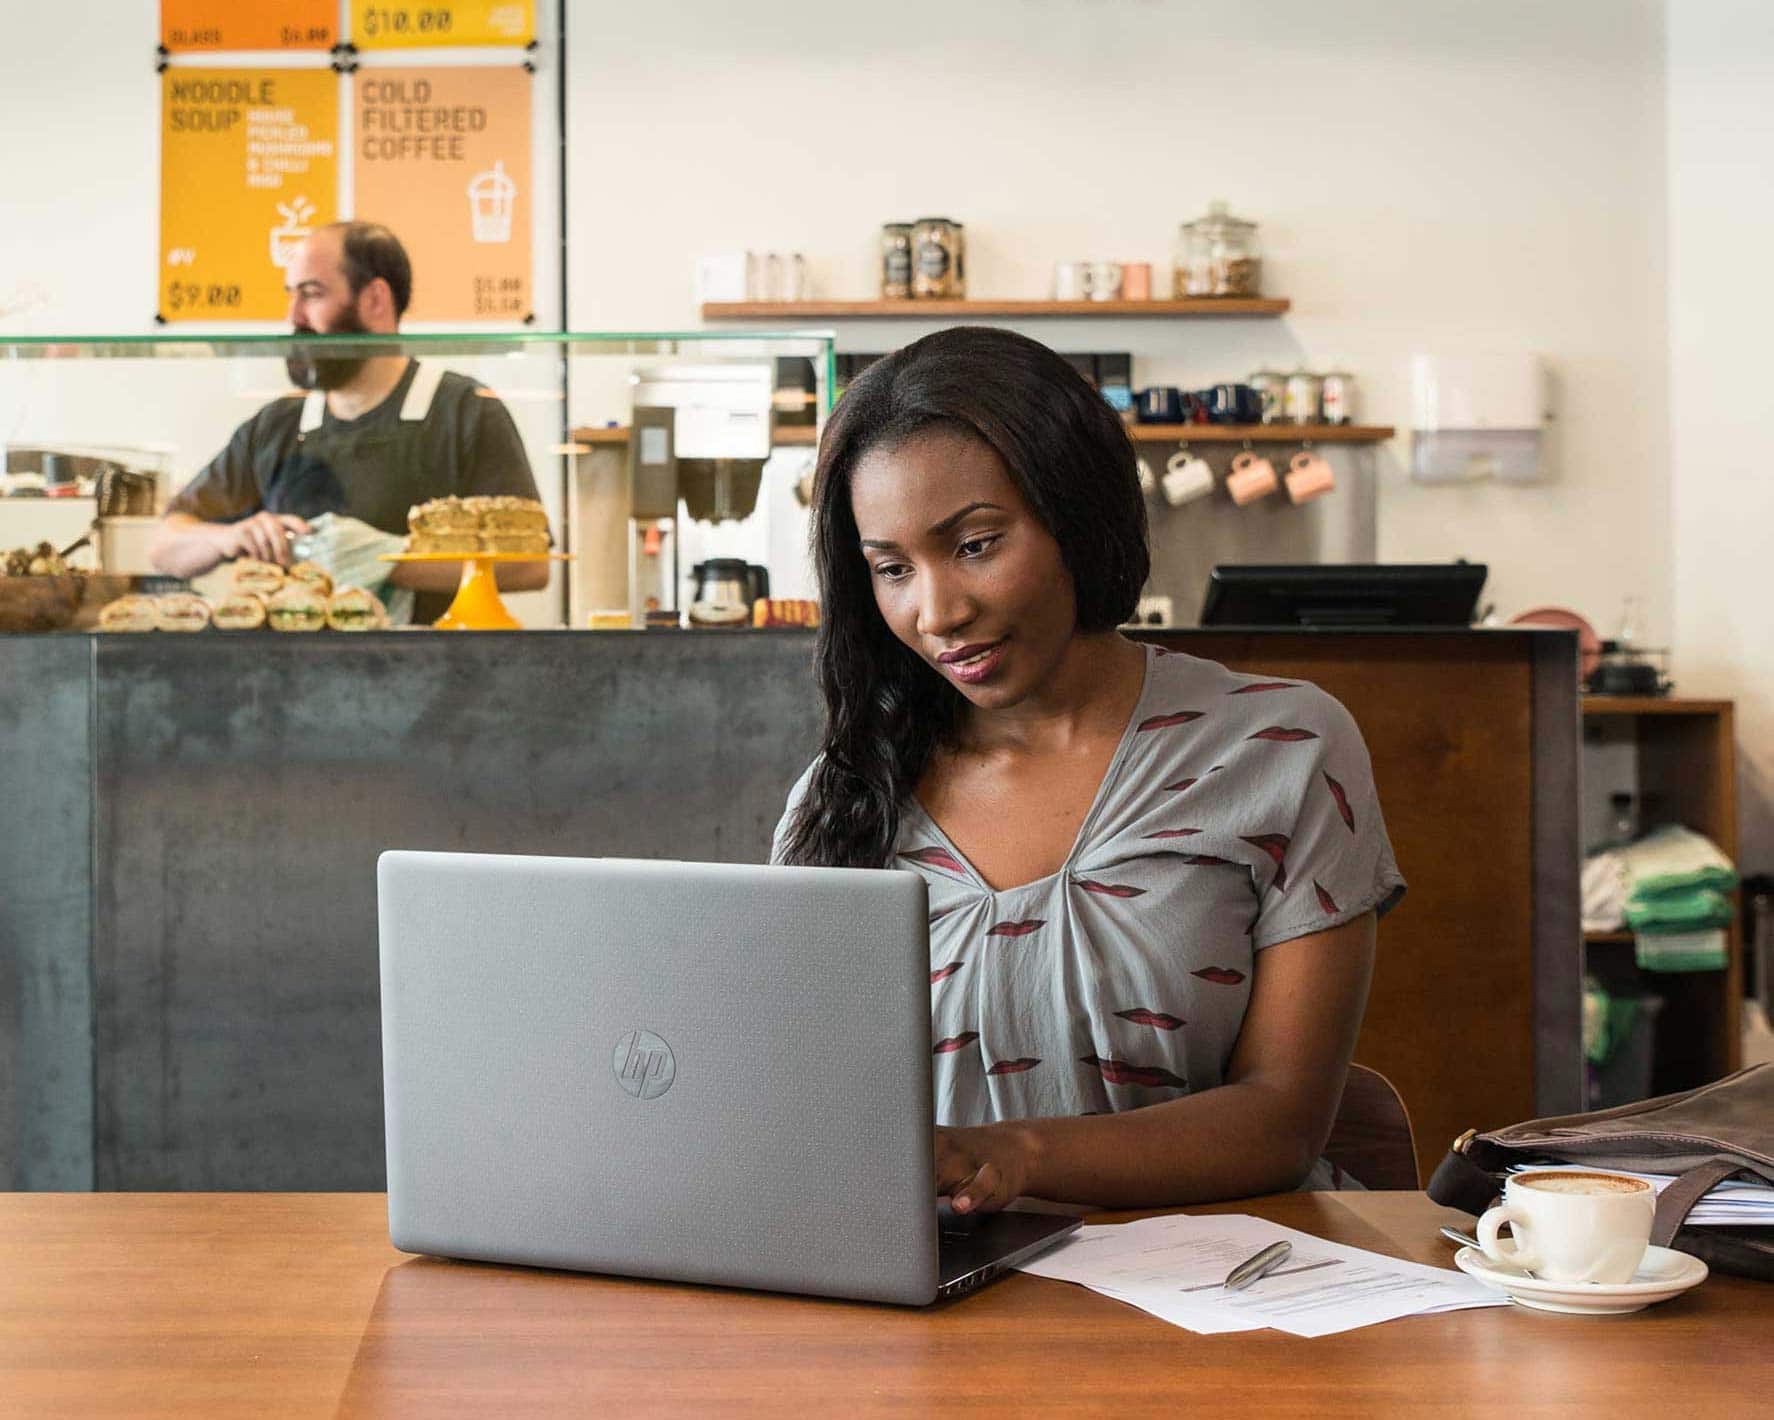 A restaurant owner uses accounting software on their laptop to run an efficient business.